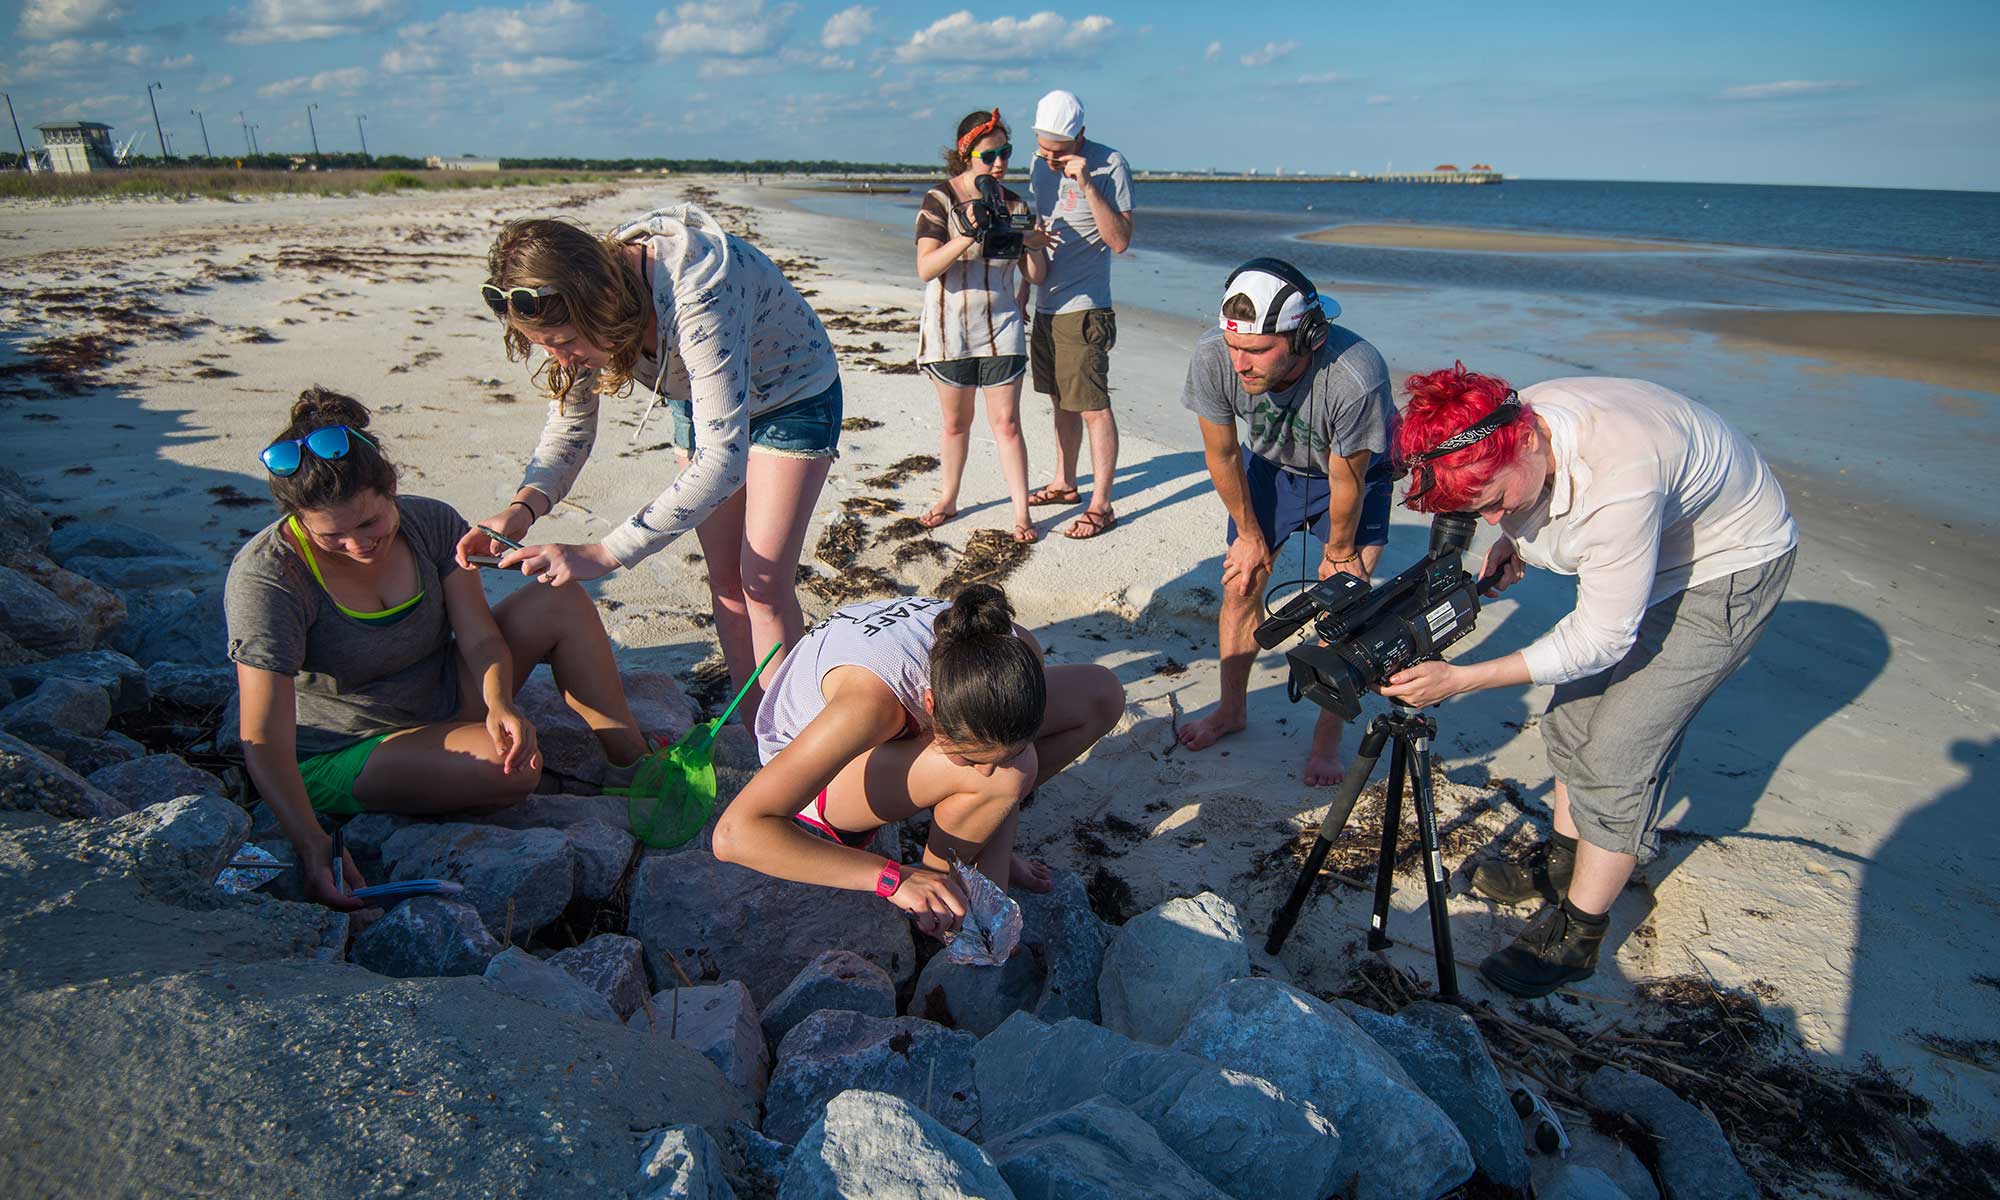 Students take video footage on the beach